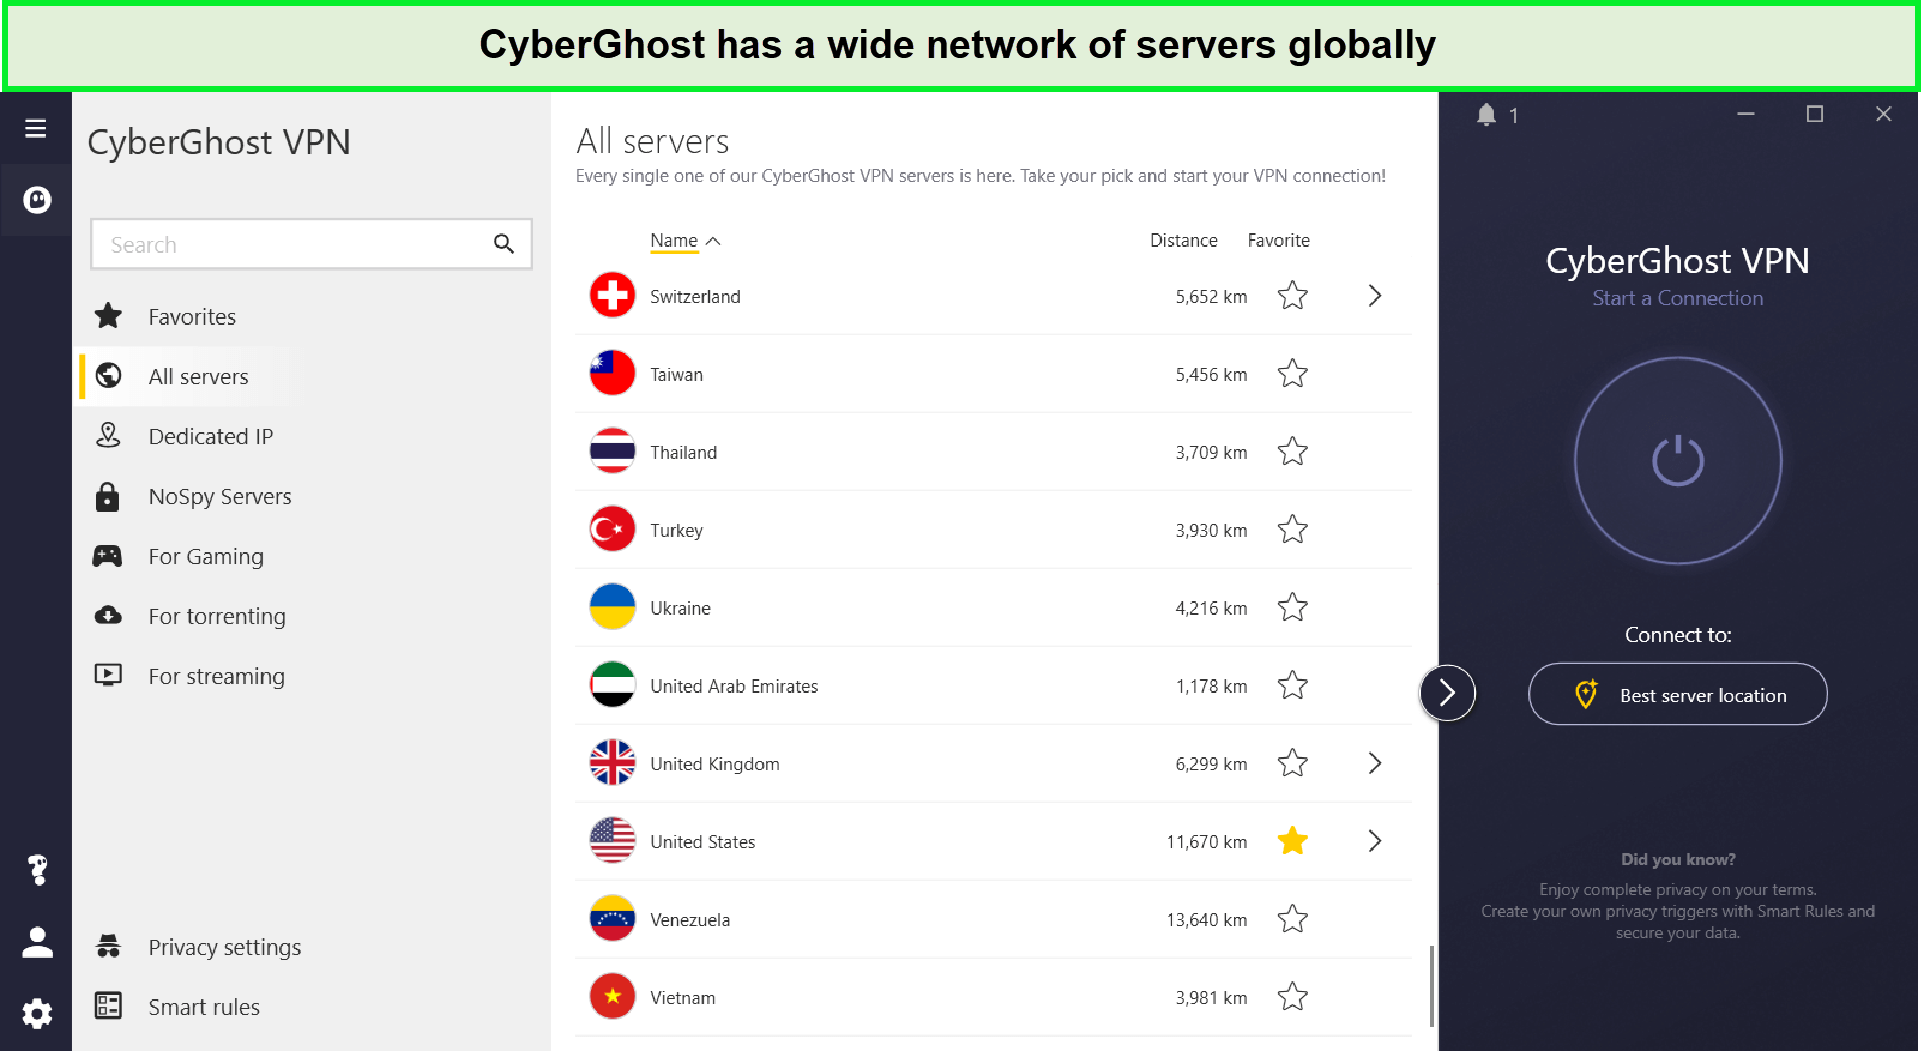 cyberghost-global-server-network-in-Singapore